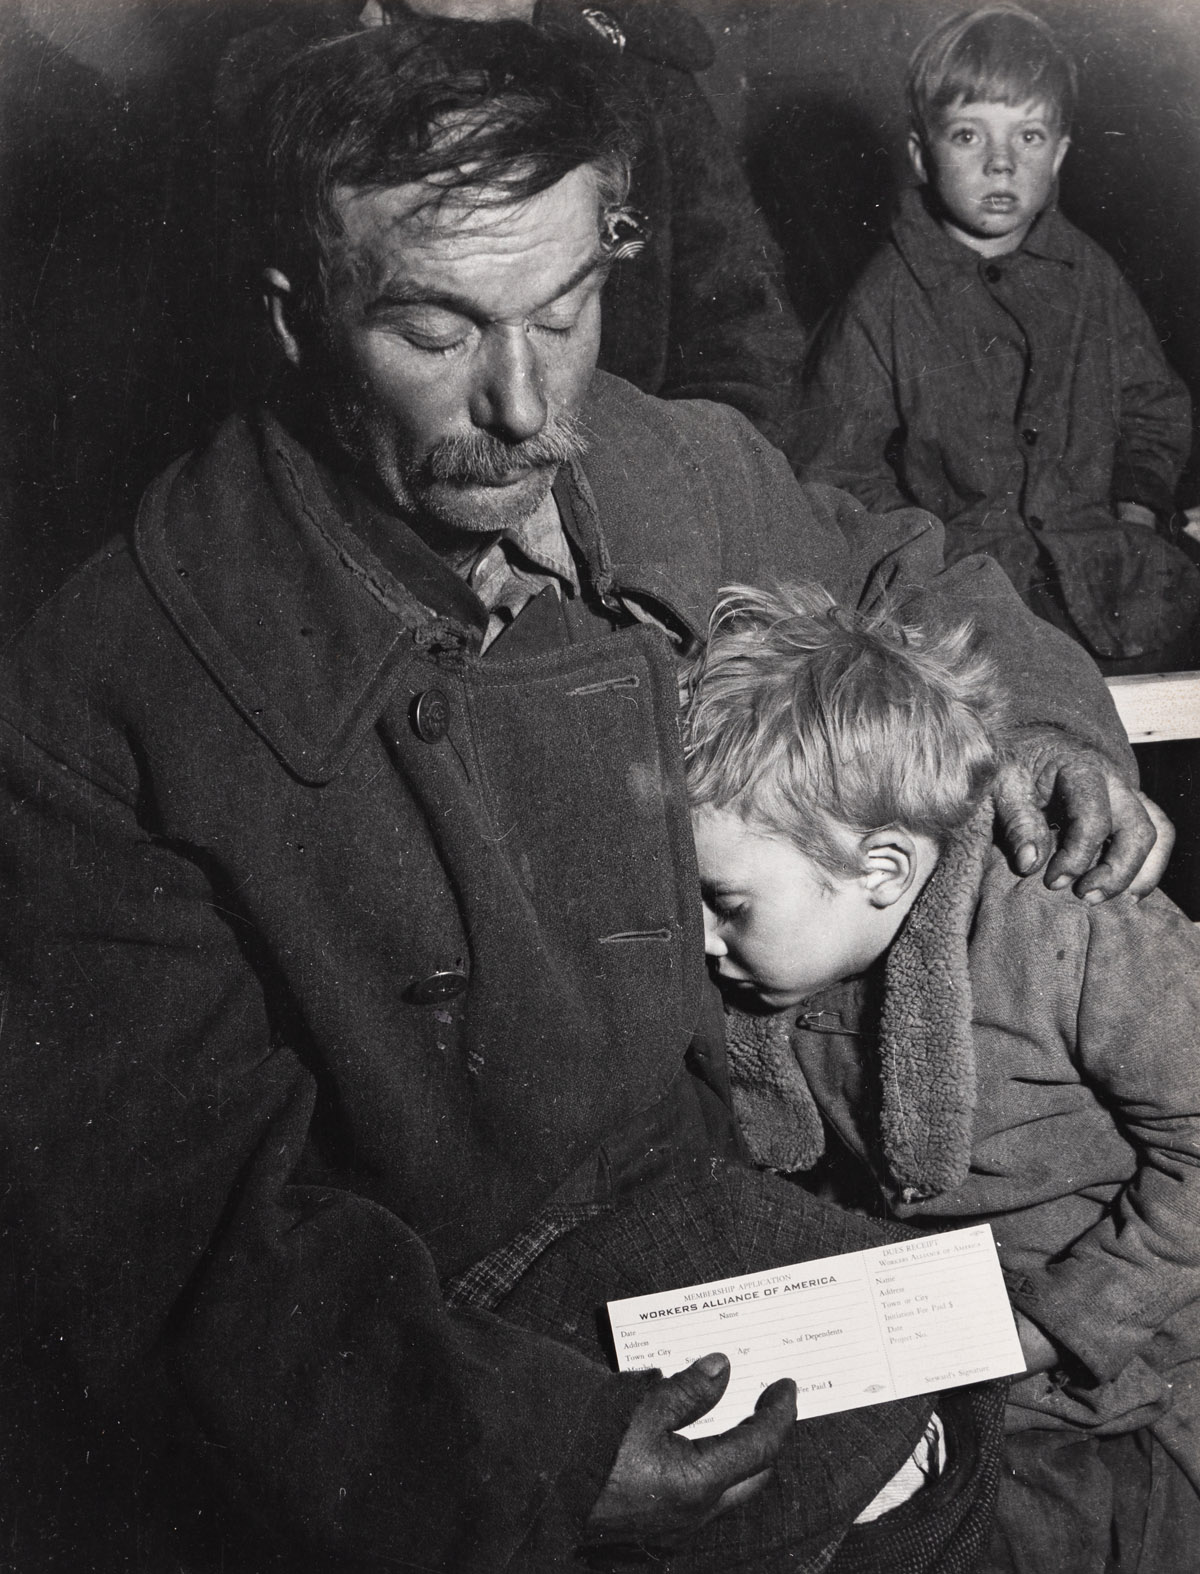 HANSEL MIETH (1909-1998) Unemployed father with son at Workers Alliance Meeting, North Platte, Neb.